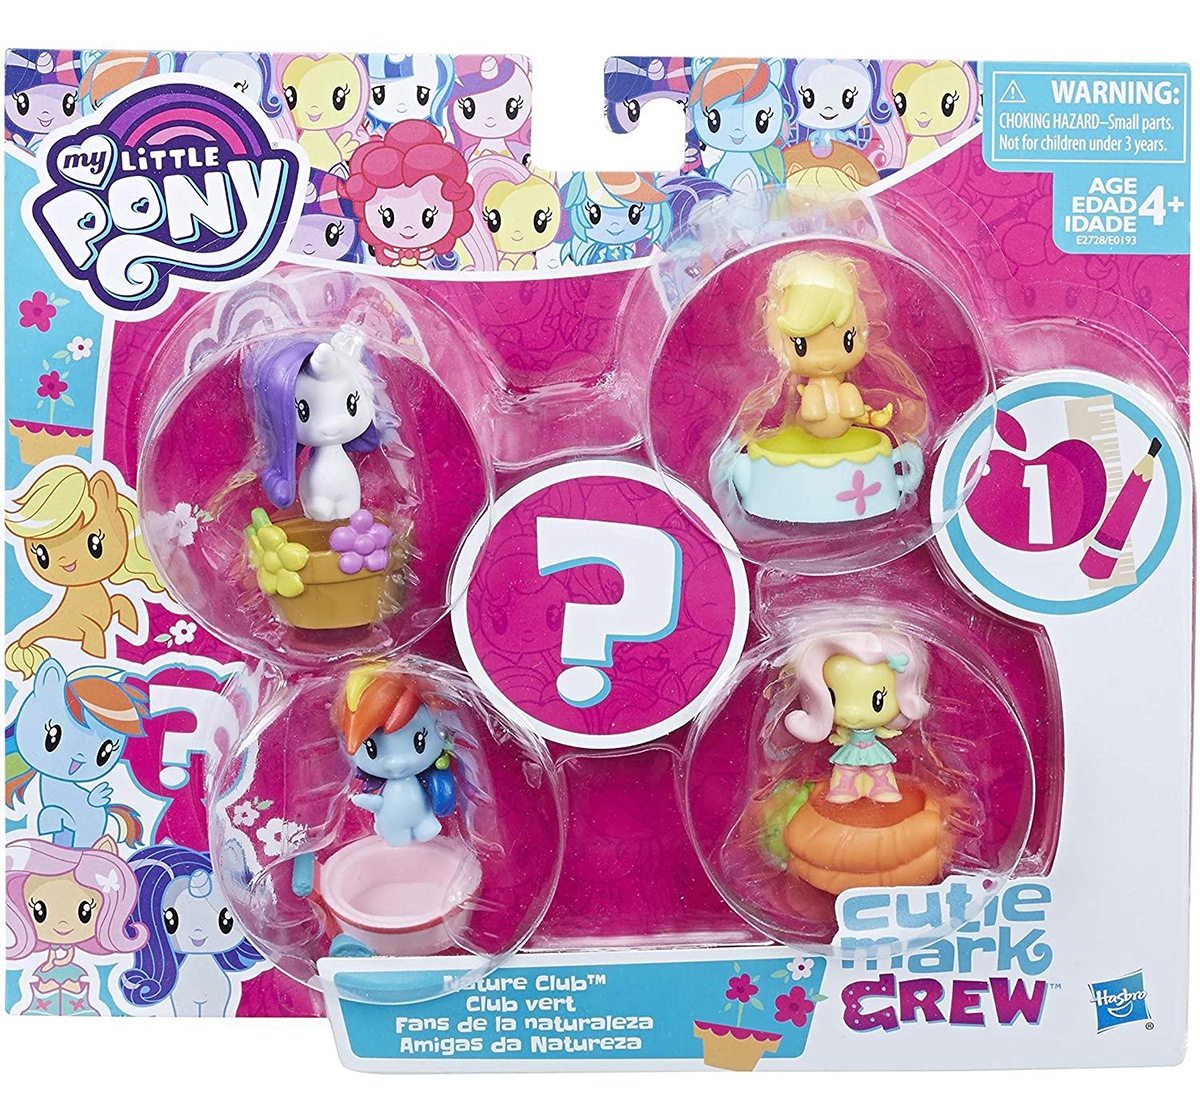 My Little Pony | My Little Pony Cutie Mark Crew Assorted Dolls & Accessories for Girls age 3Y+ 1